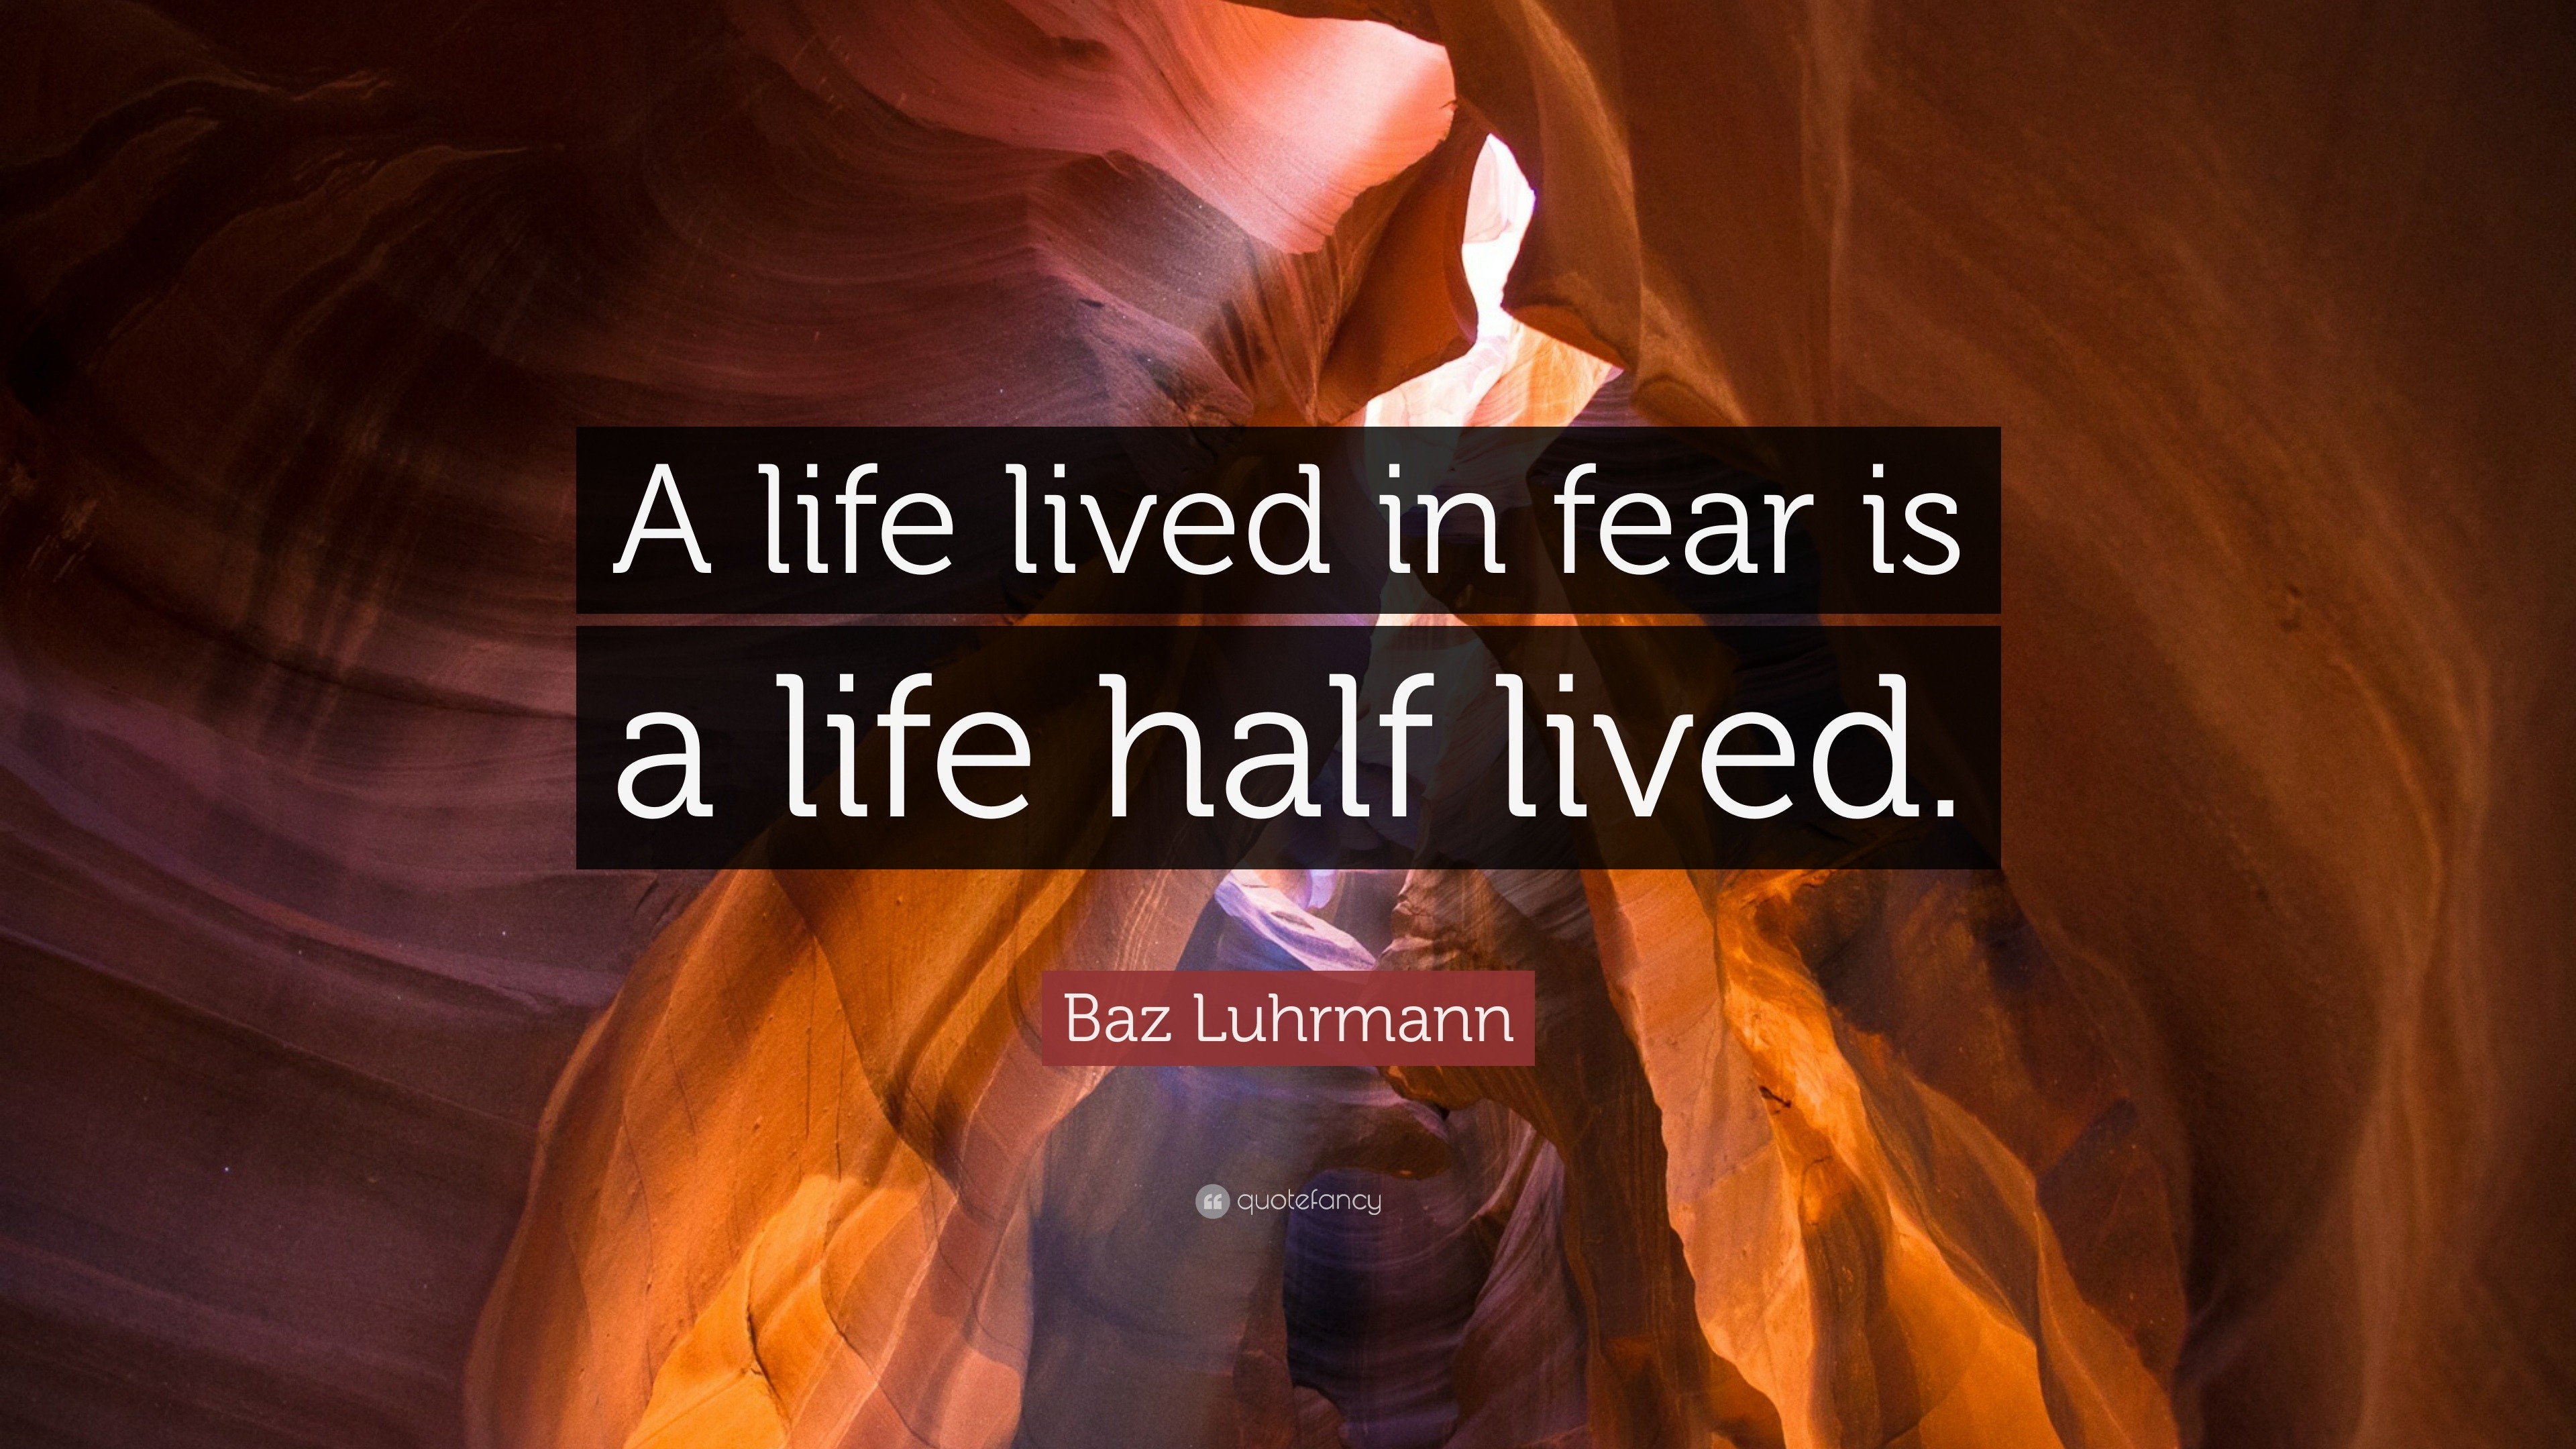 Baz Luhrmann Quote “A life lived in fear is a life half lived